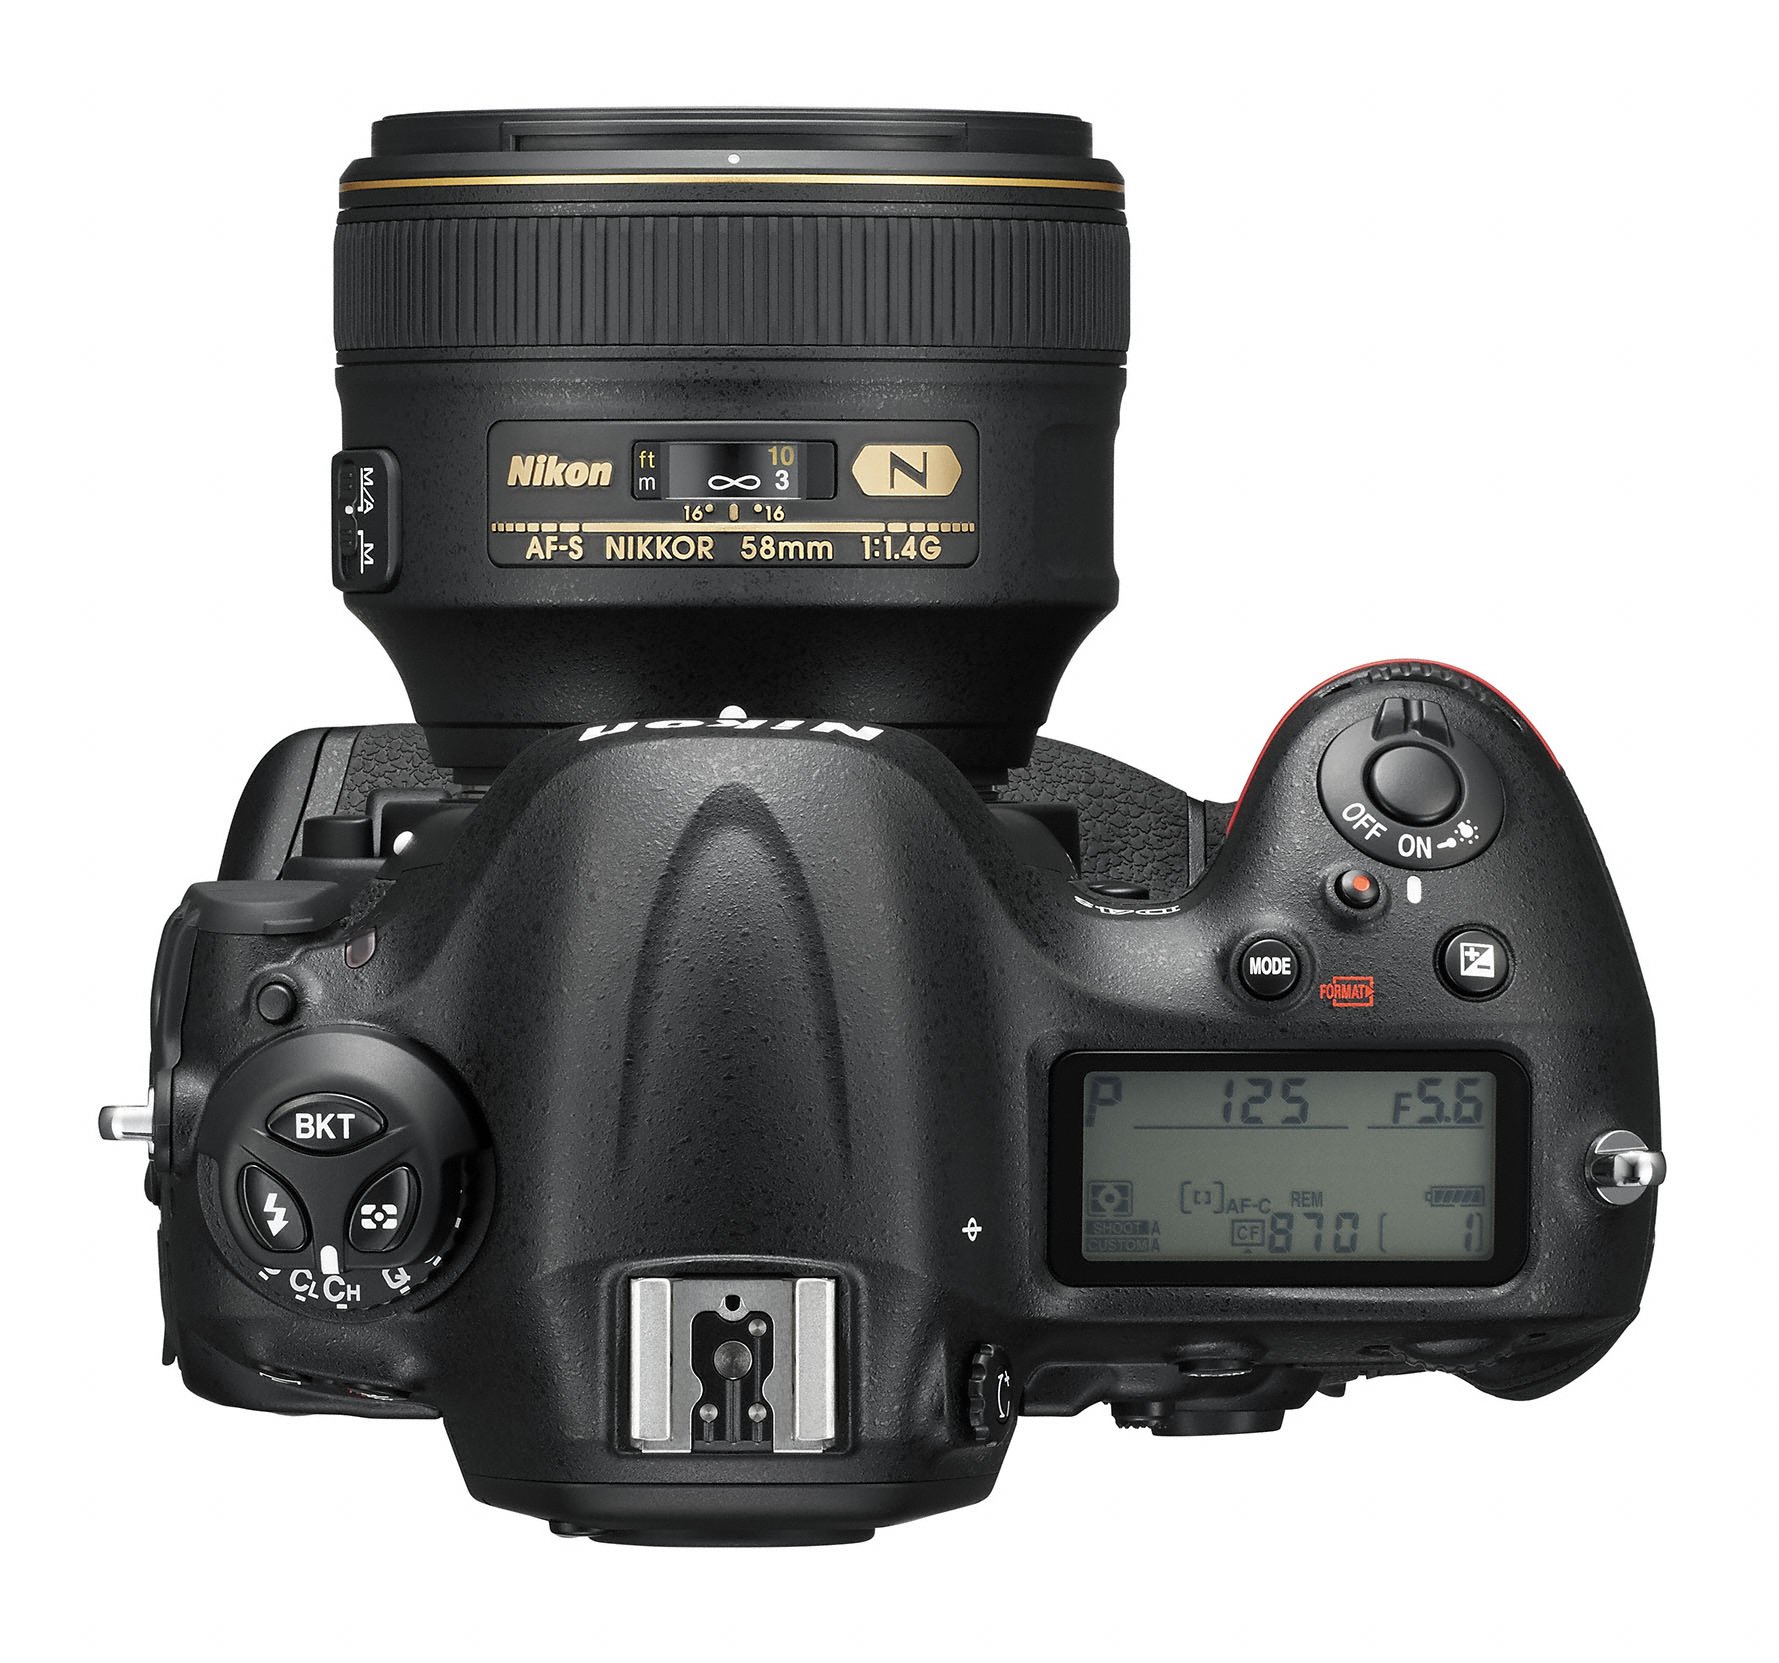 Nikon Announces the New D4s: Same as the D4, But Faster - The Phoblographer